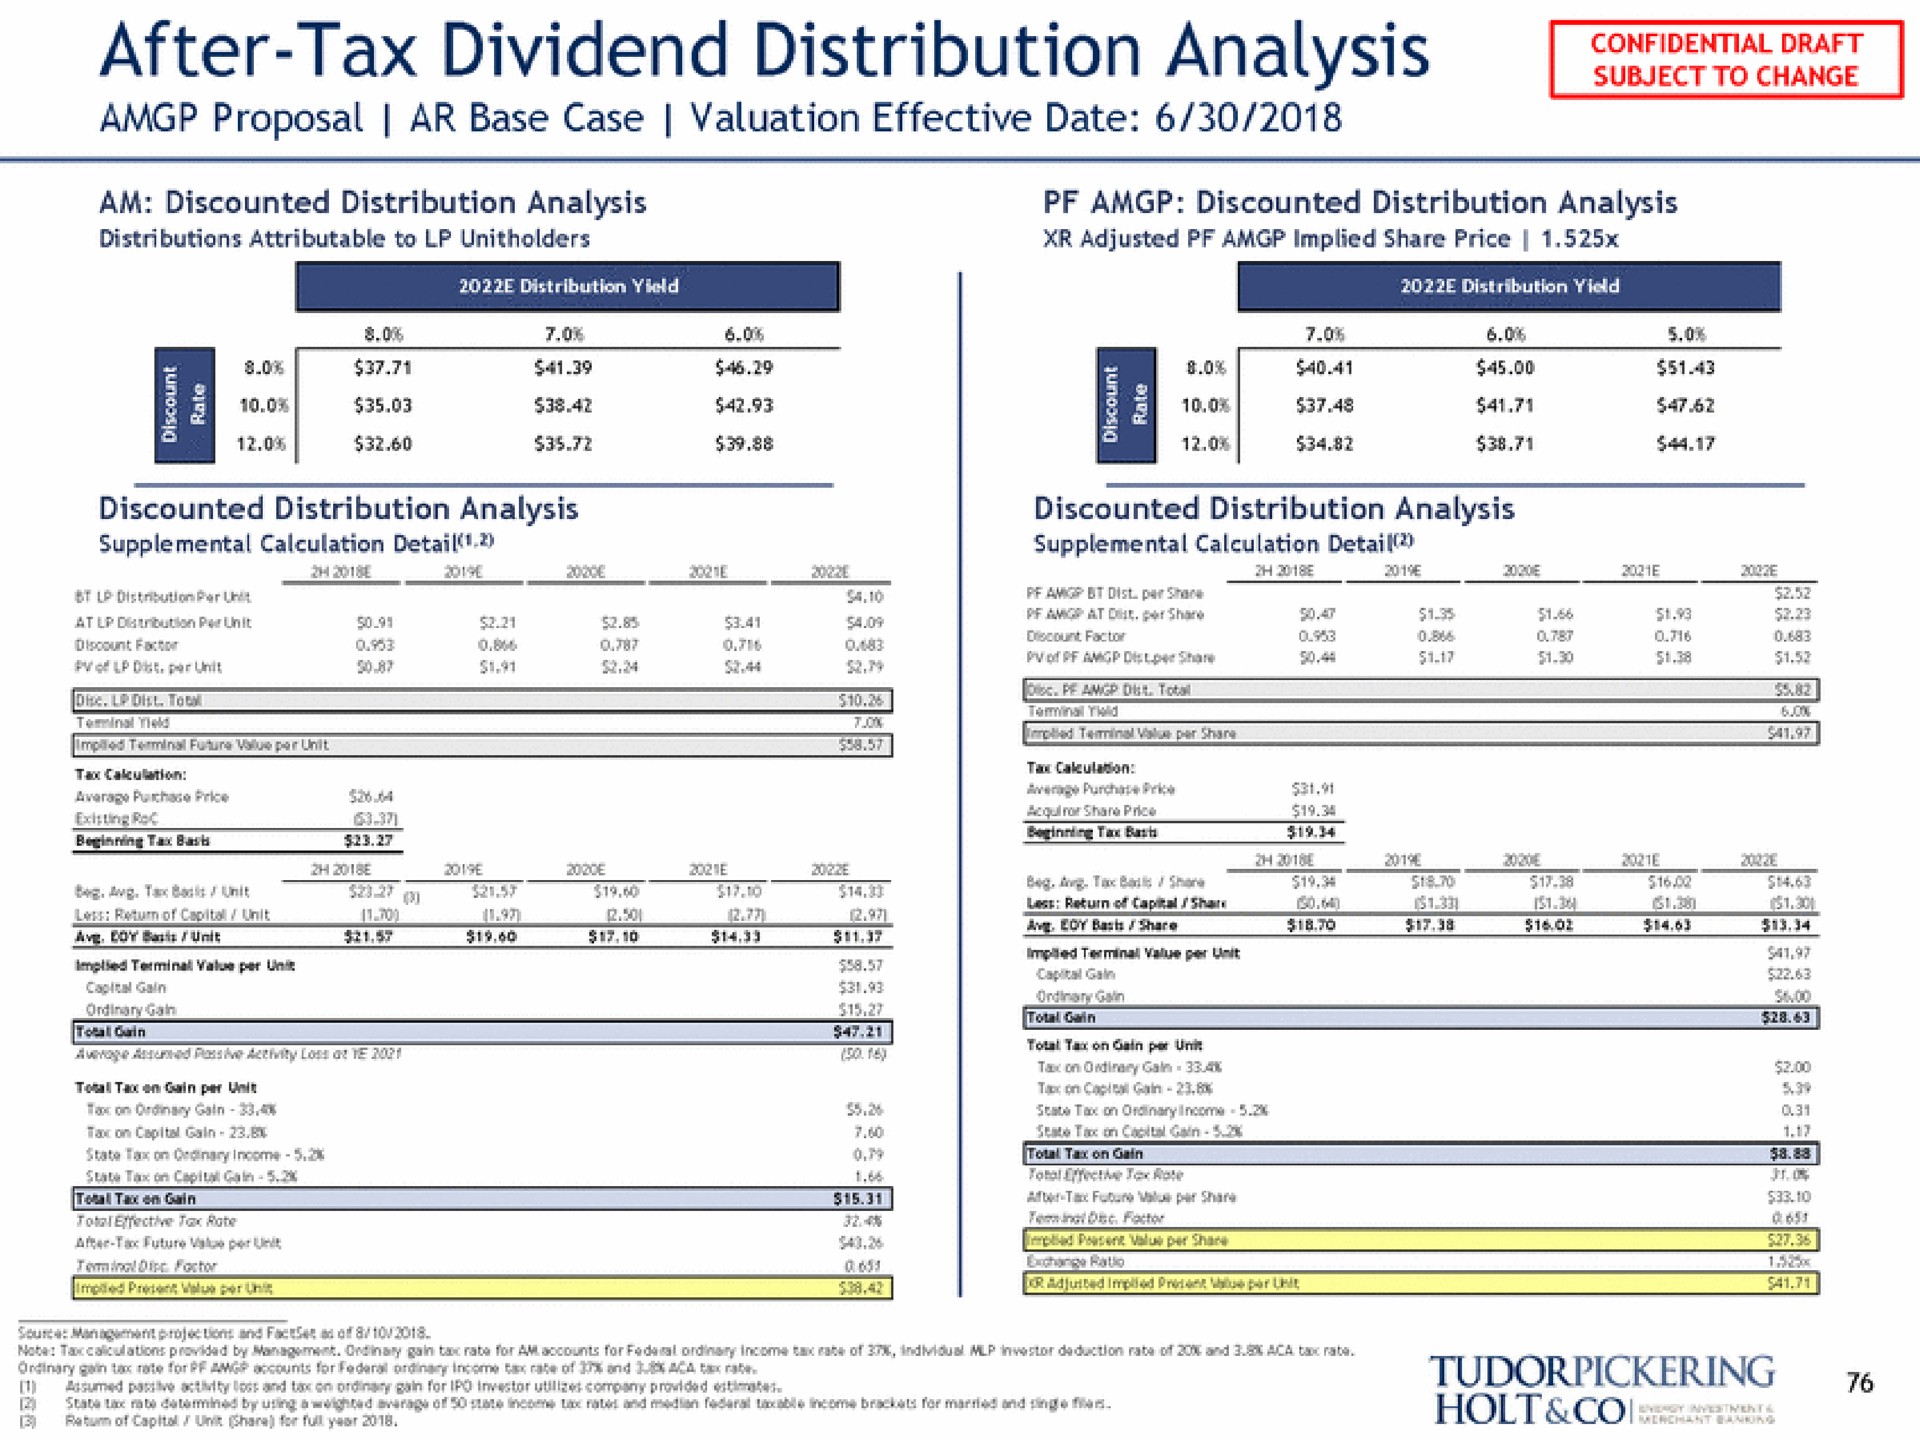 after tax dividend distribution a confidential draft holt lessees | Tudor, Pickering, Holt & Co